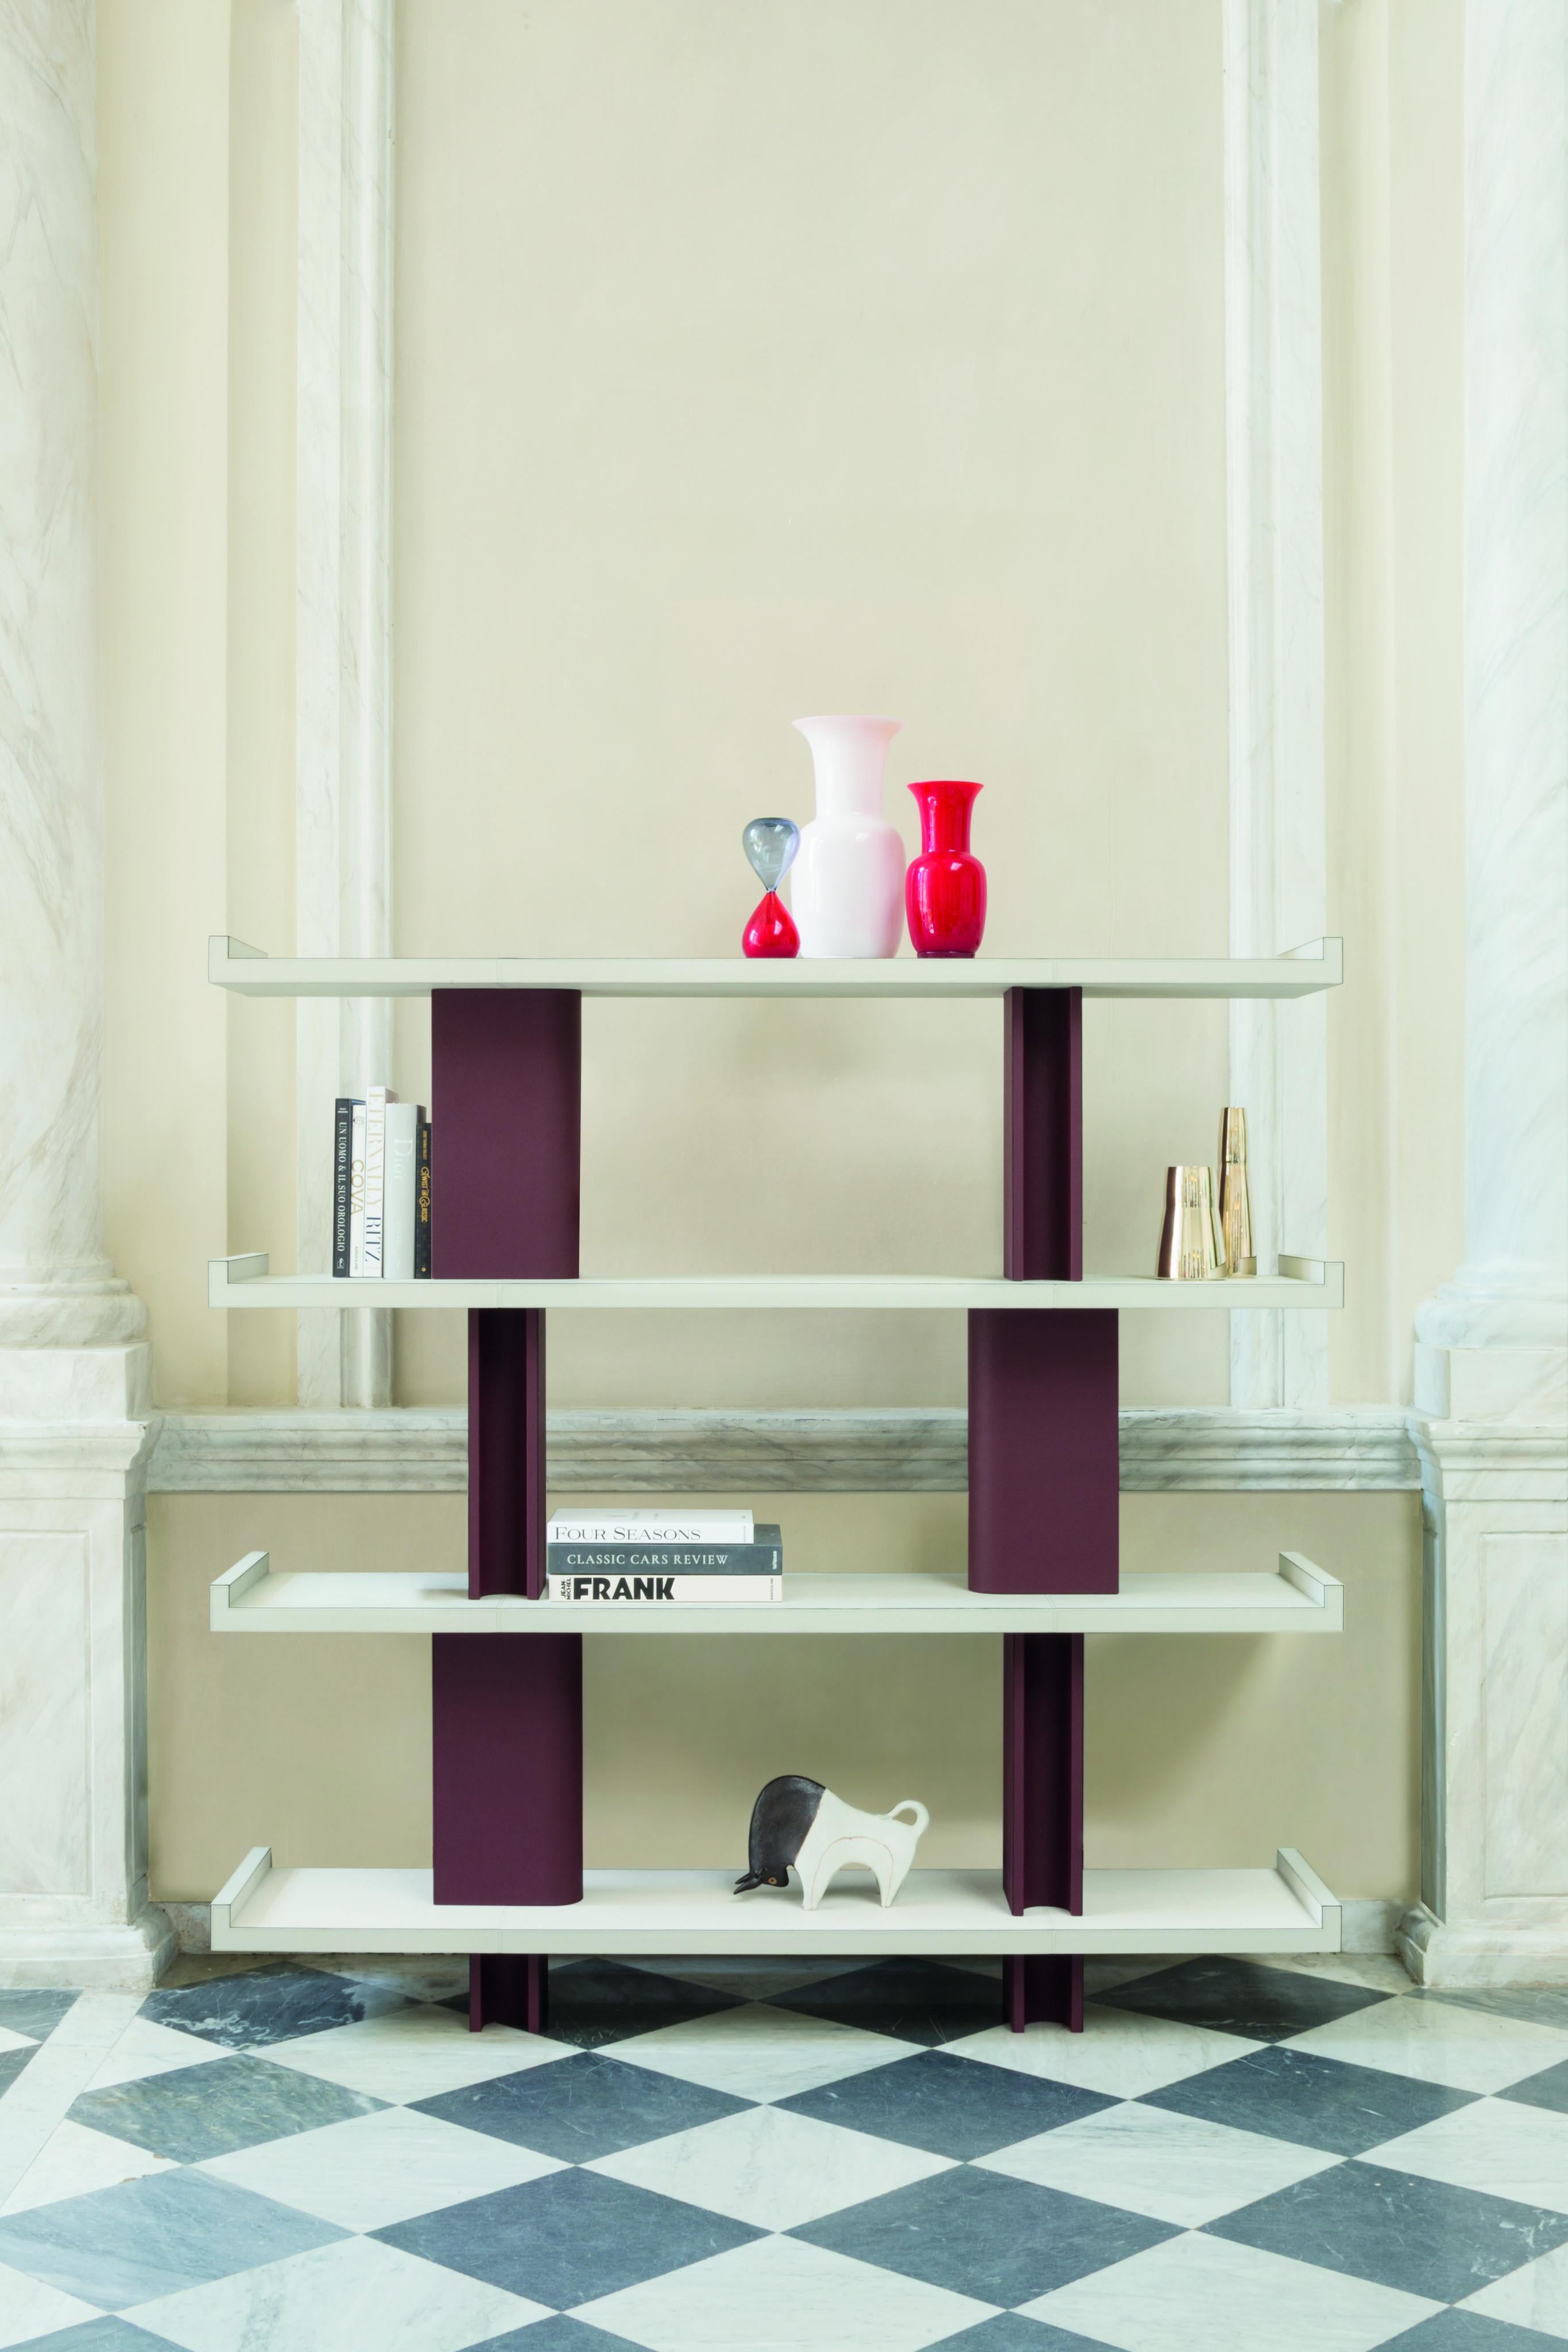 Pagoda Bookshelf  -- Stephane Parmentier x Giobagnara

Available only in printed calfskin, suede, or nappa finish.

Embracing sleek designs and beautiful materials, the Stephane Parmentier Collection for Giobagnara epitomizes a commitment to